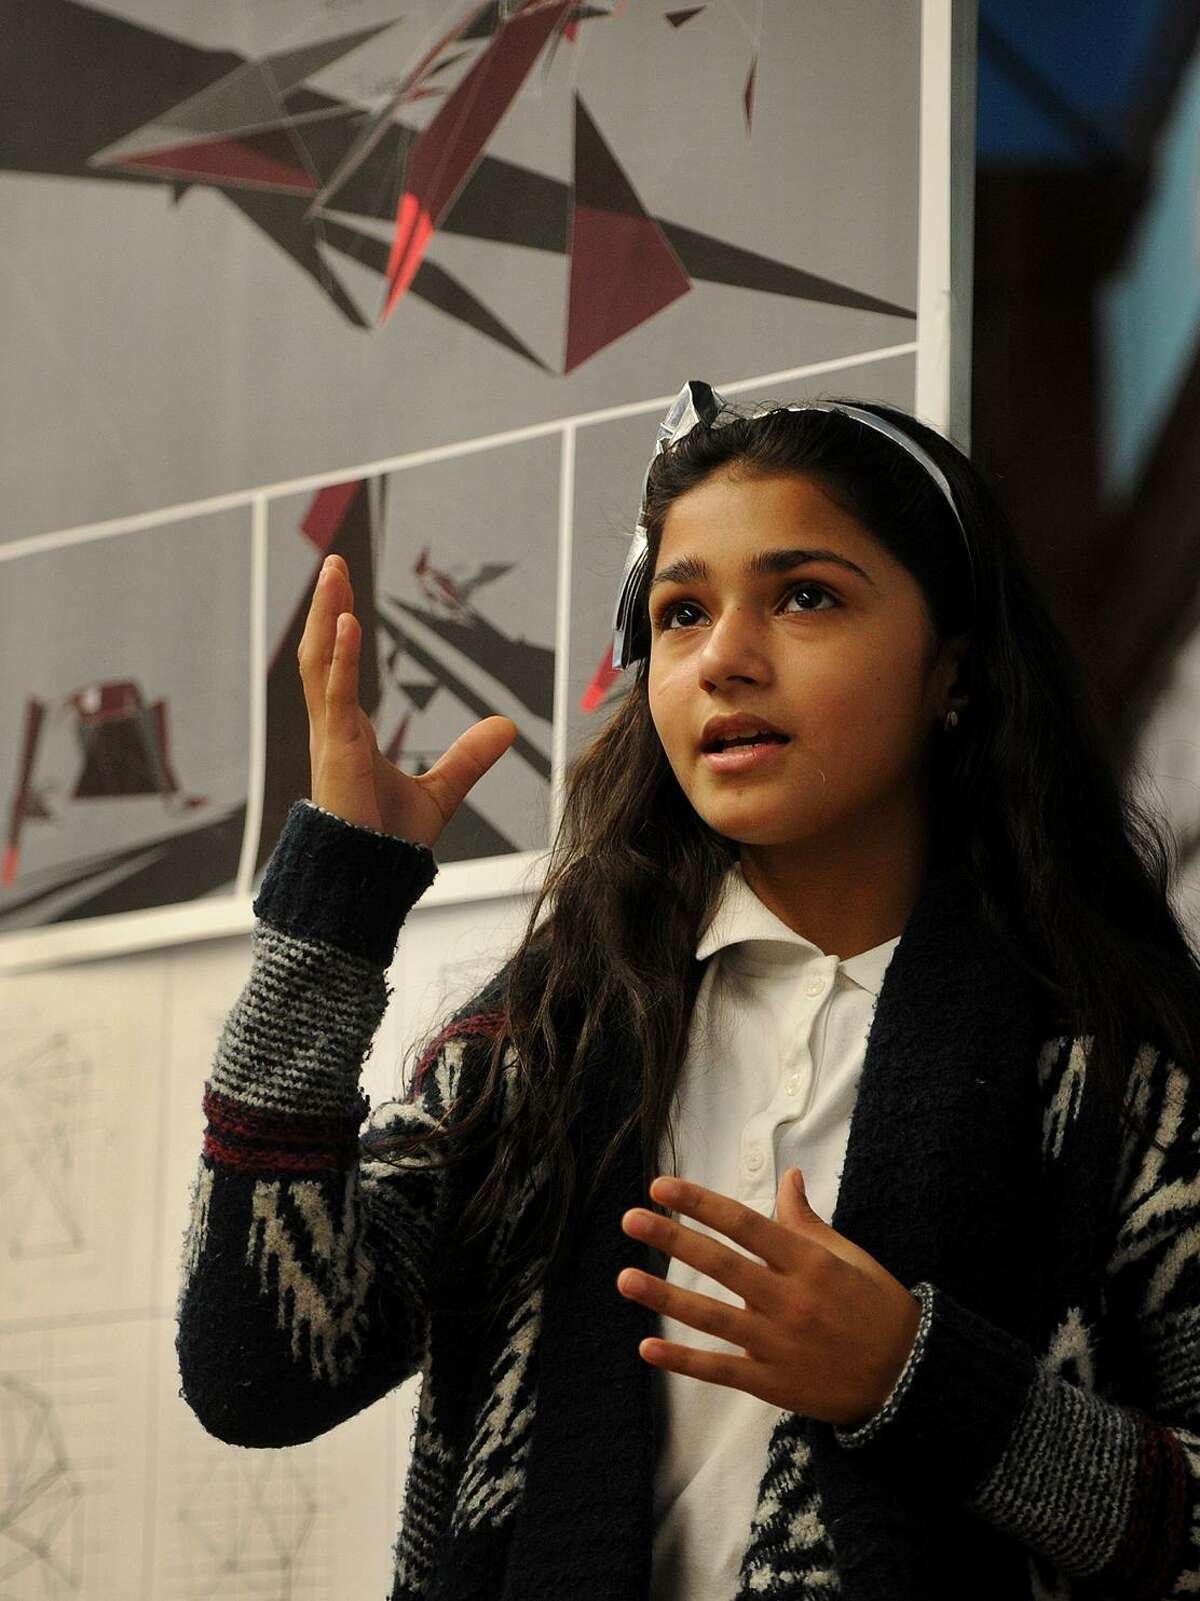 Sixth grader Milayna Roman, 11, presents her architecture project that she completed as part of the Thom Mayne Young Architects program at Hall School in Bridgeport, Conn. on Tuesday, December 5, 2017. Students learned to use a computer design program to artistically reimagine their classroom space.